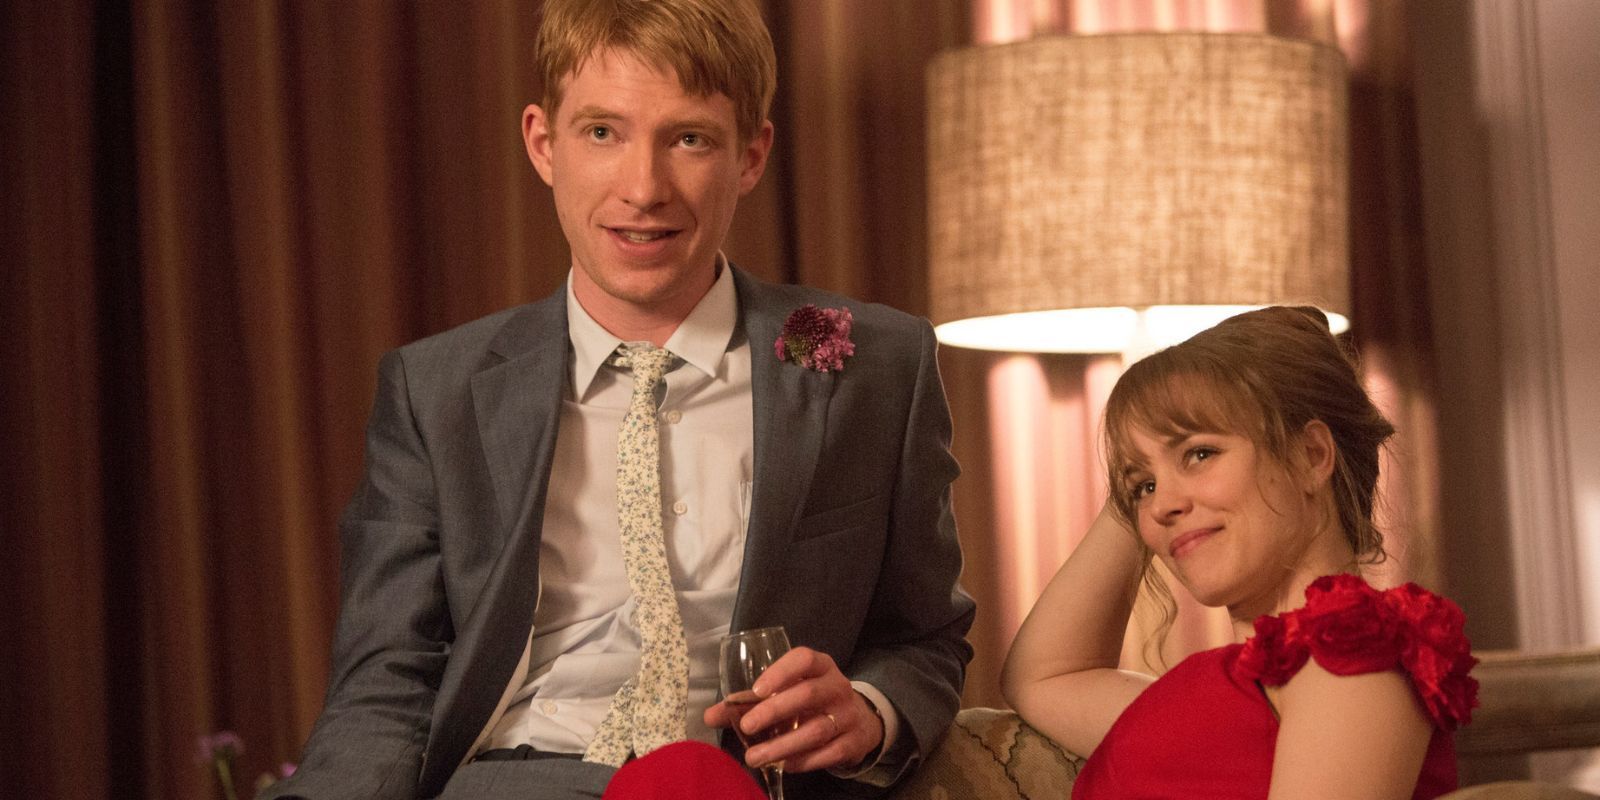 Rachel McAdams as Mary and Domhnall Gleeson as Tim in About Time